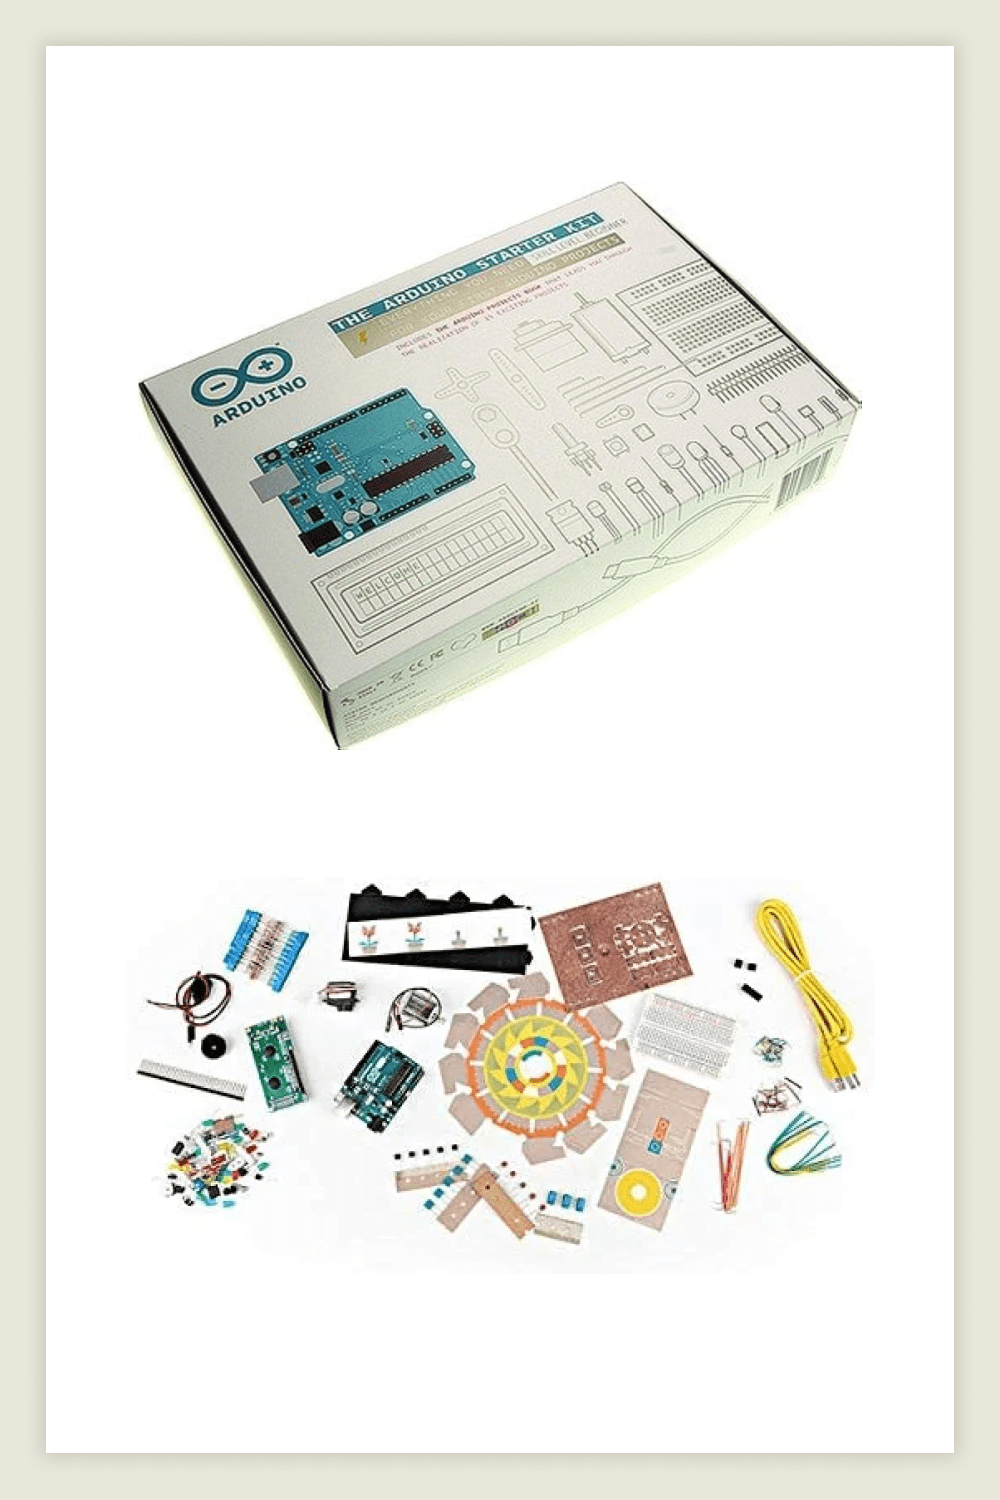 Photo and composition of the Arduino Starter Kit.